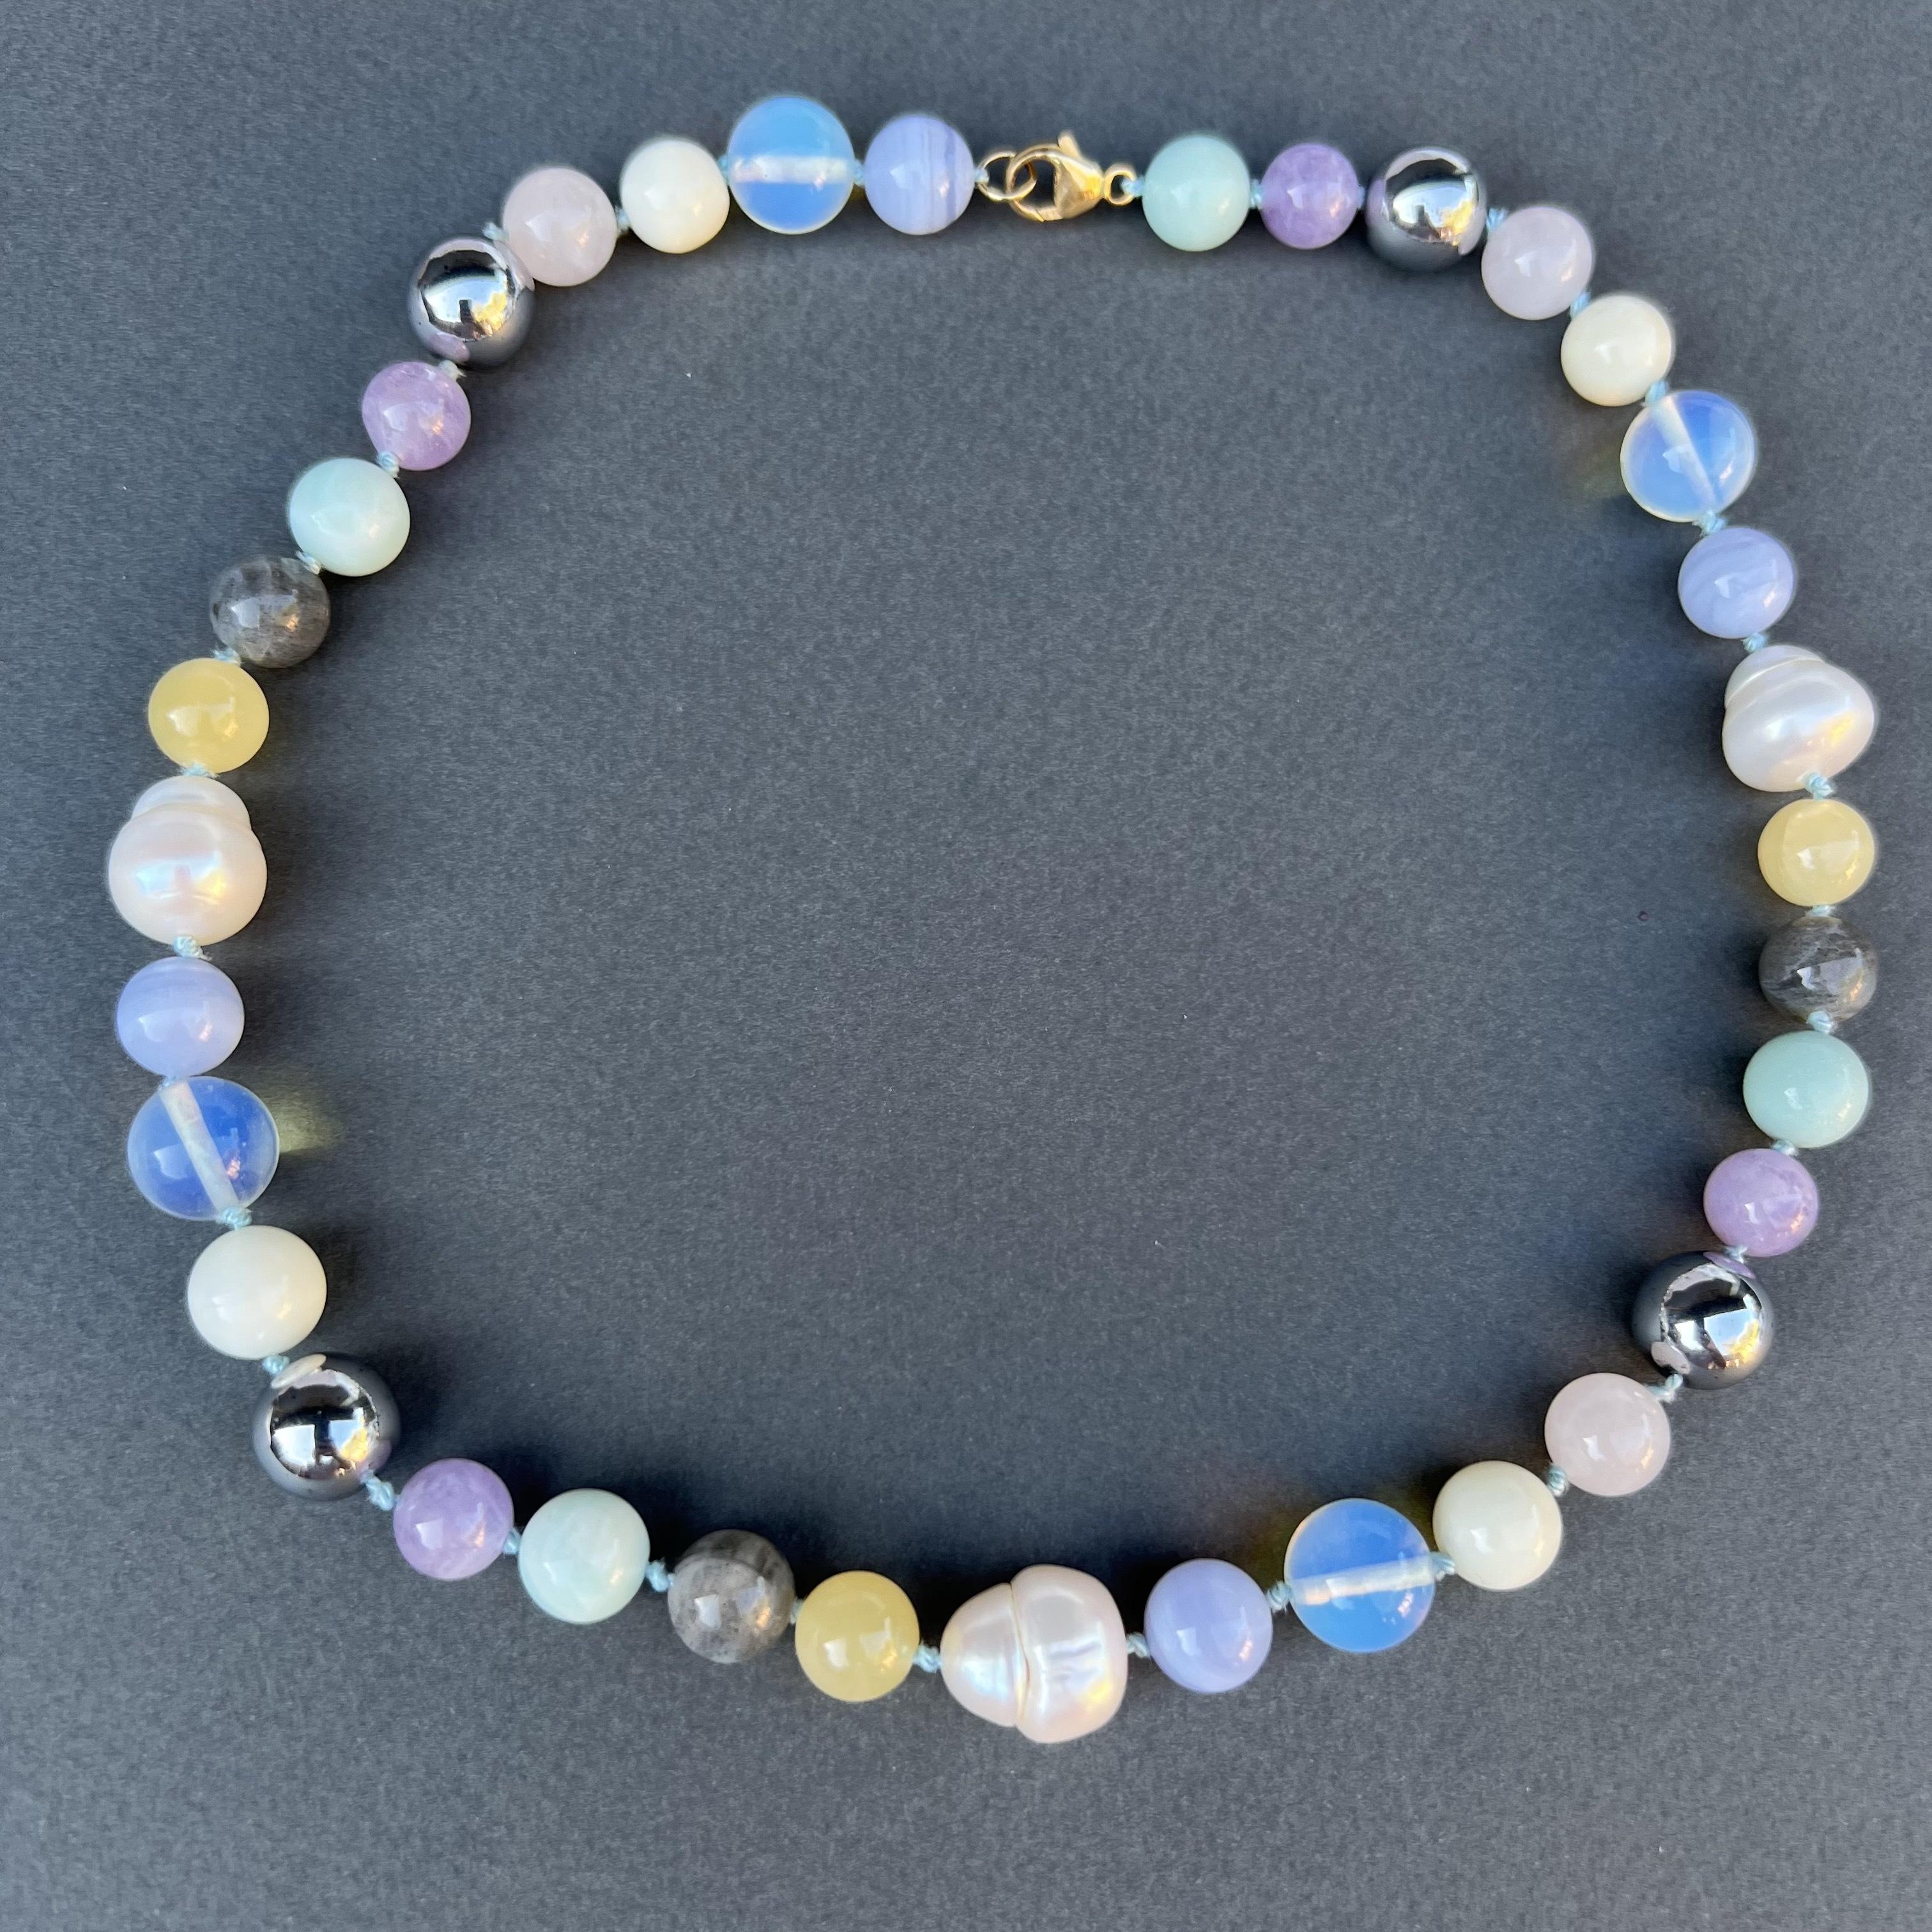 Colorful Beaded Pearl Necklace Choker Pastel Pink Light Blue Yellow J Dauphin In New Condition For Sale In Los Angeles, CA